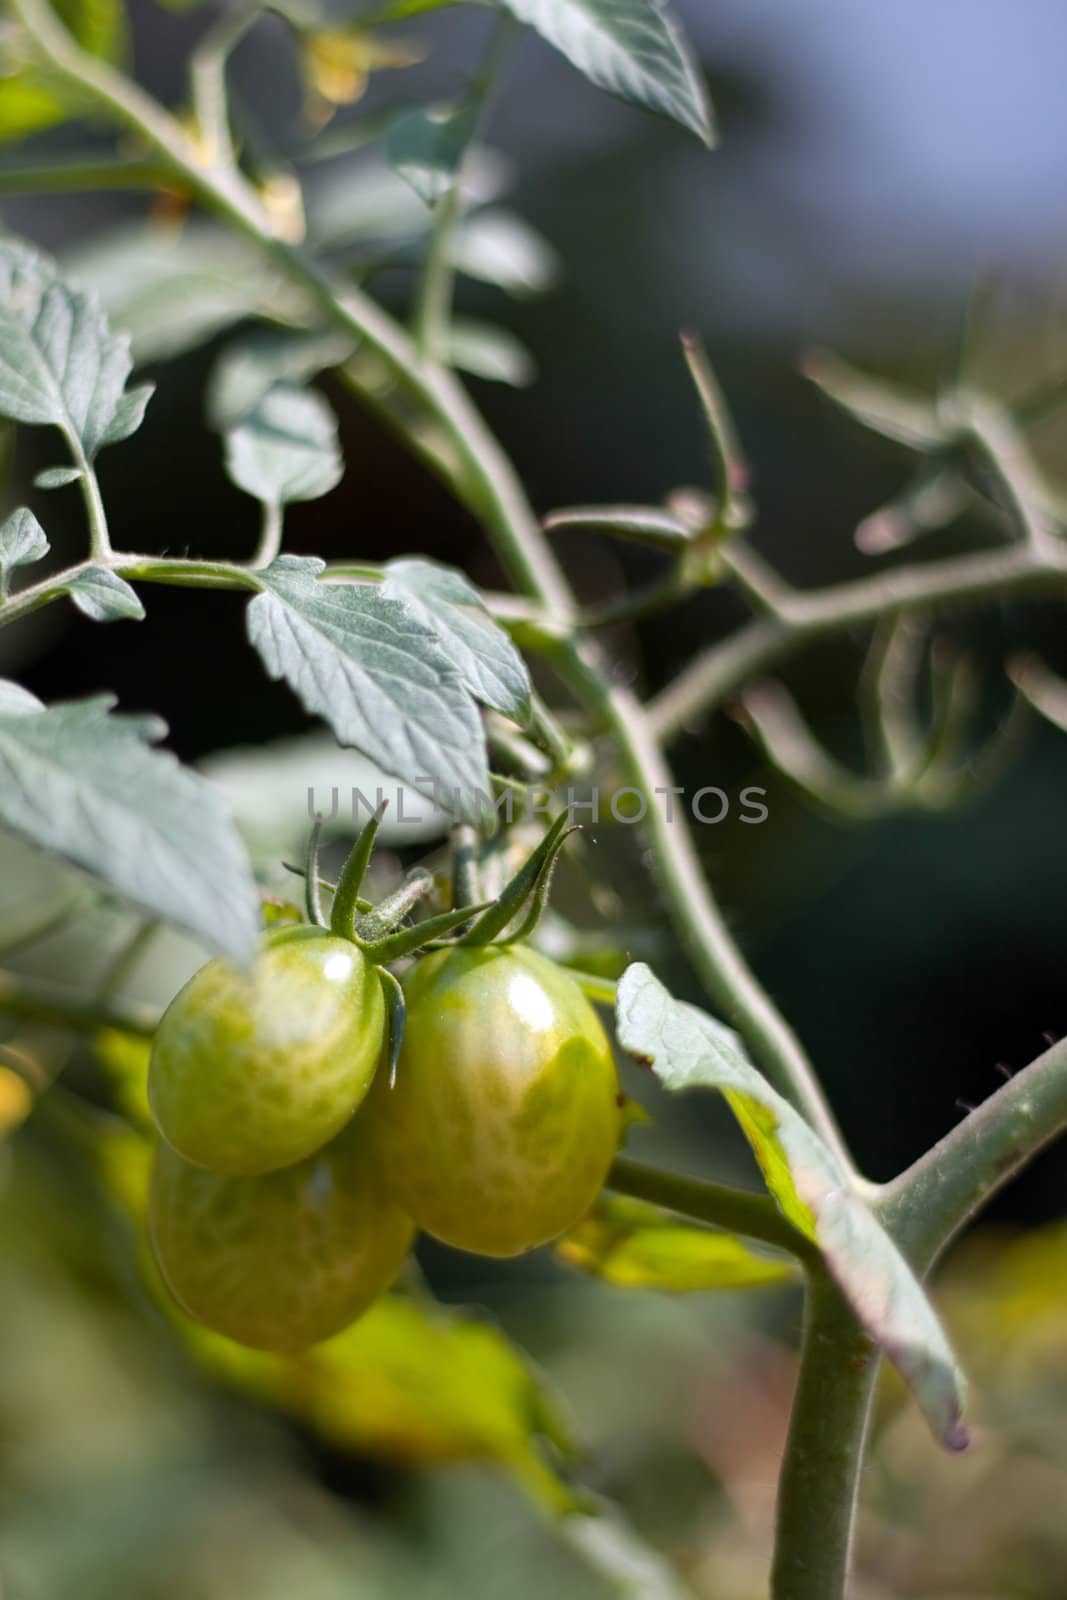 Some fresh grown green grape tomatoes slowly ripening right on the vine.